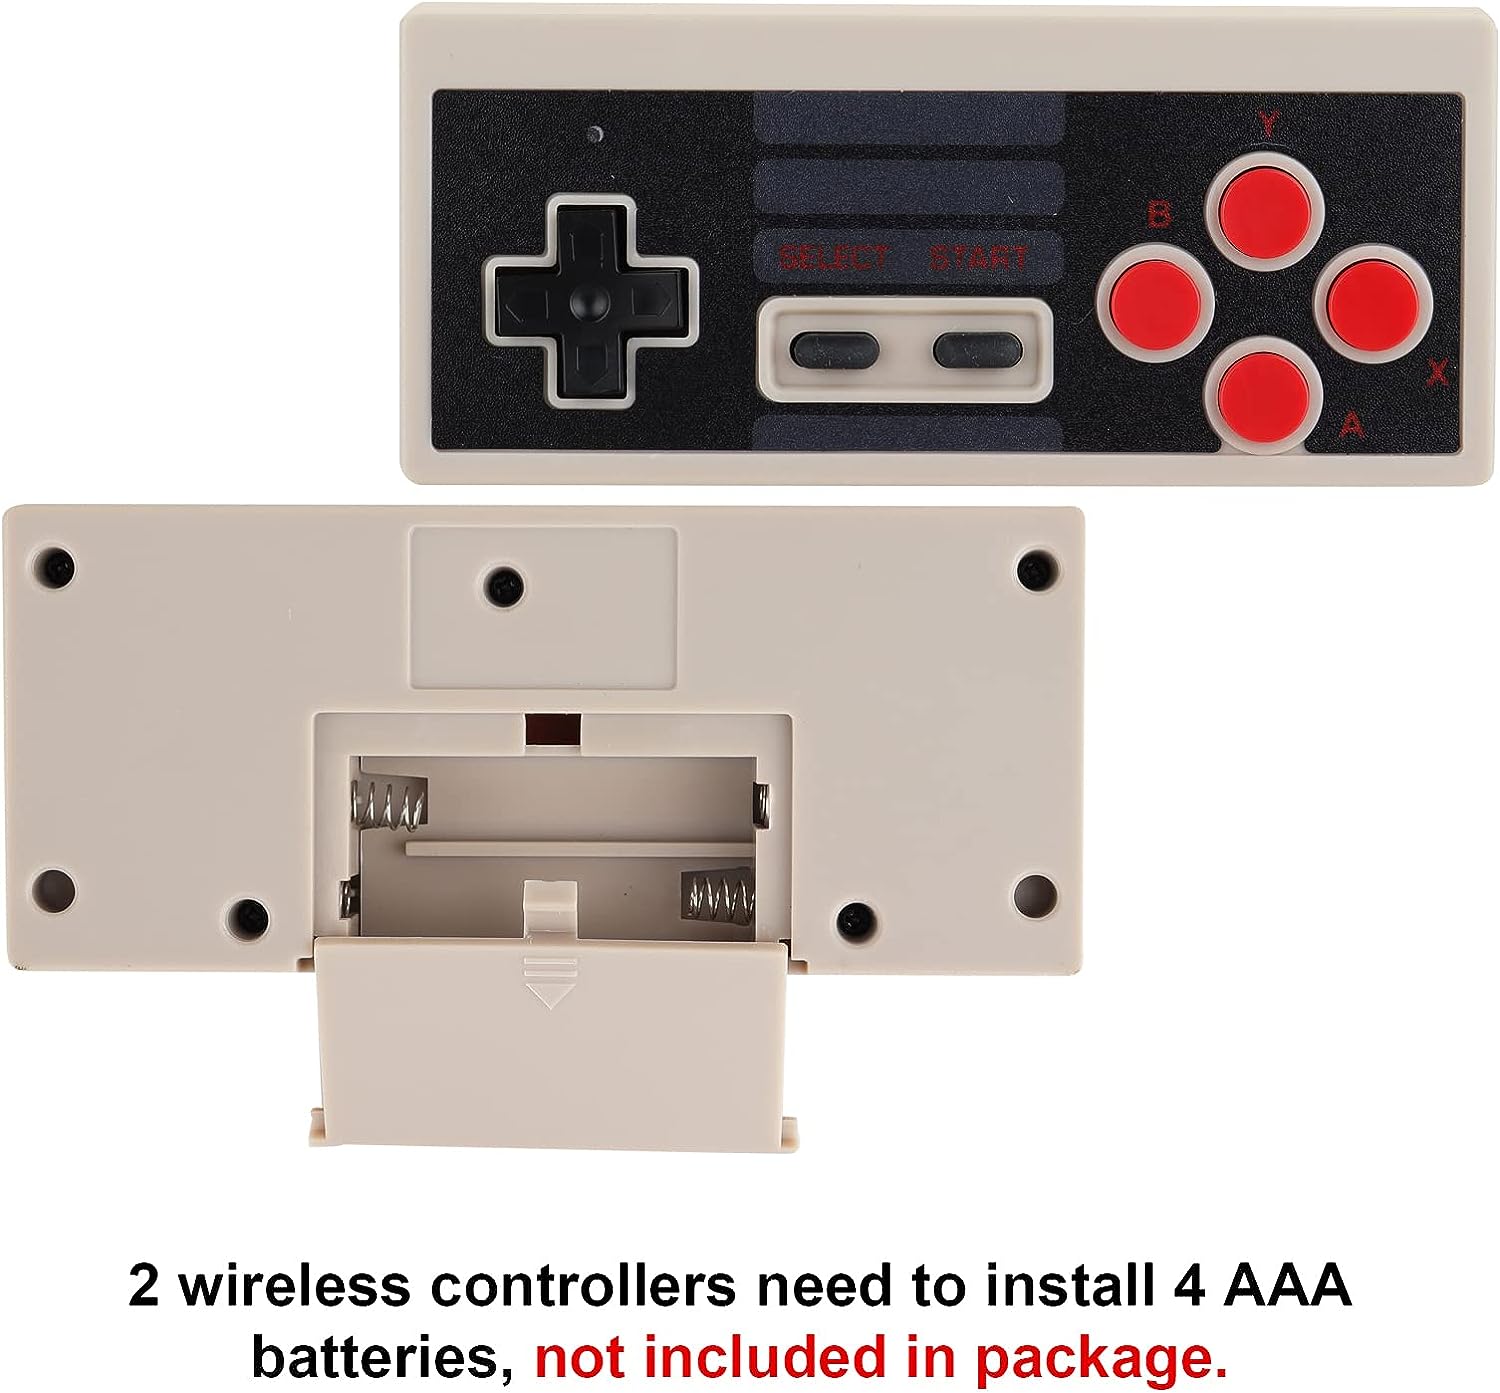 Classic Wireless Retro Video Game Console, AV Output Built-in with 620 Mini Retro Game Console Dual Players Mode for Dual Players Kids, Adult, Children Gift, Valentine/Birthday Gift